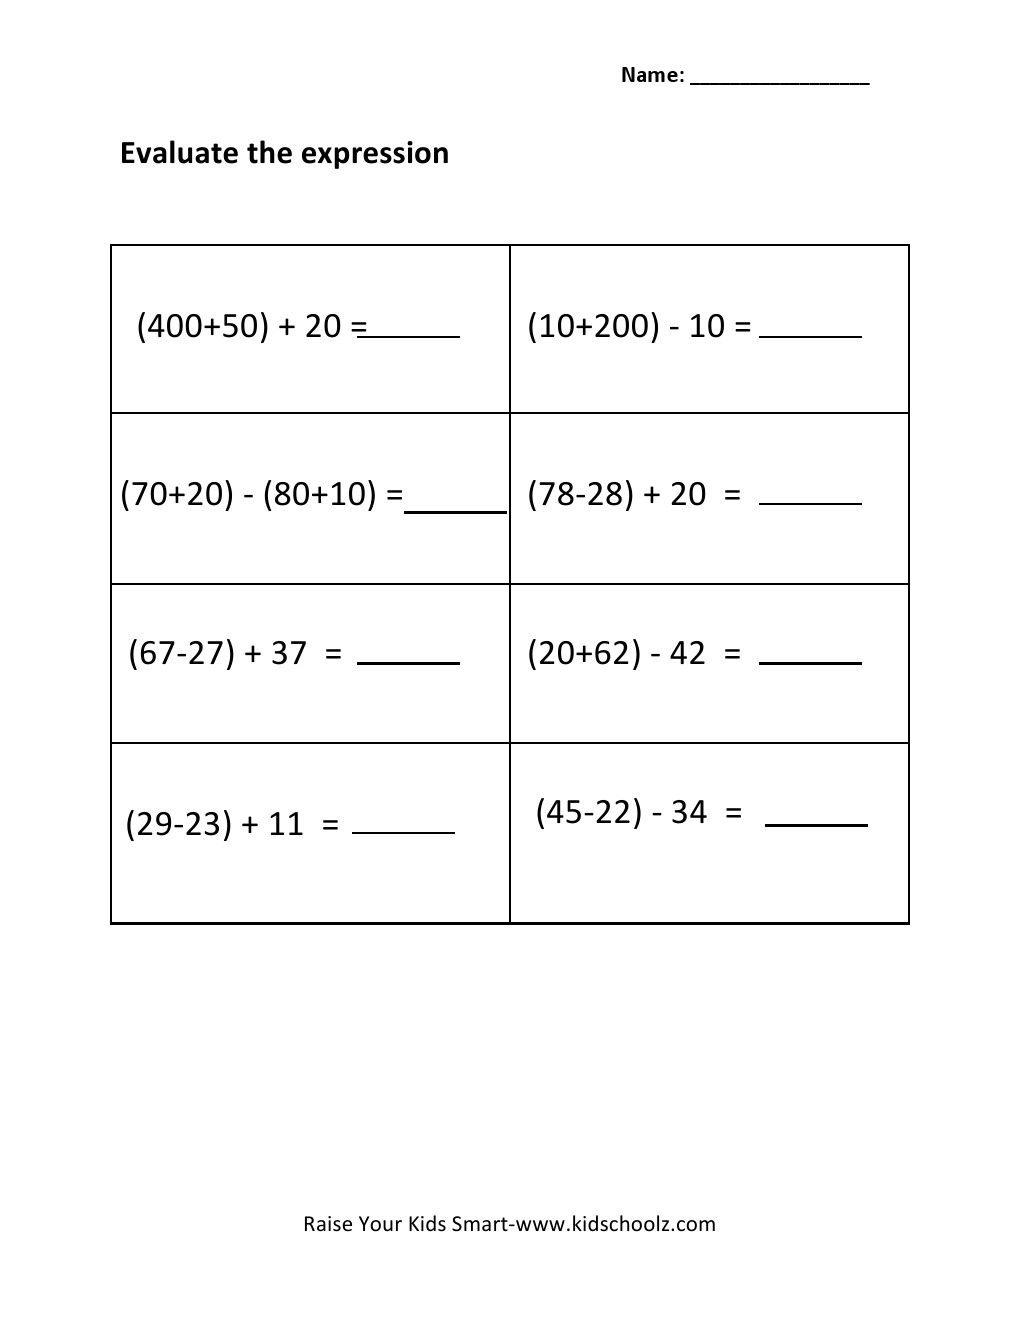 11-best-images-of-cryptic-quiz-math-worksheet-answers-e-9-variable-expressions-algebra